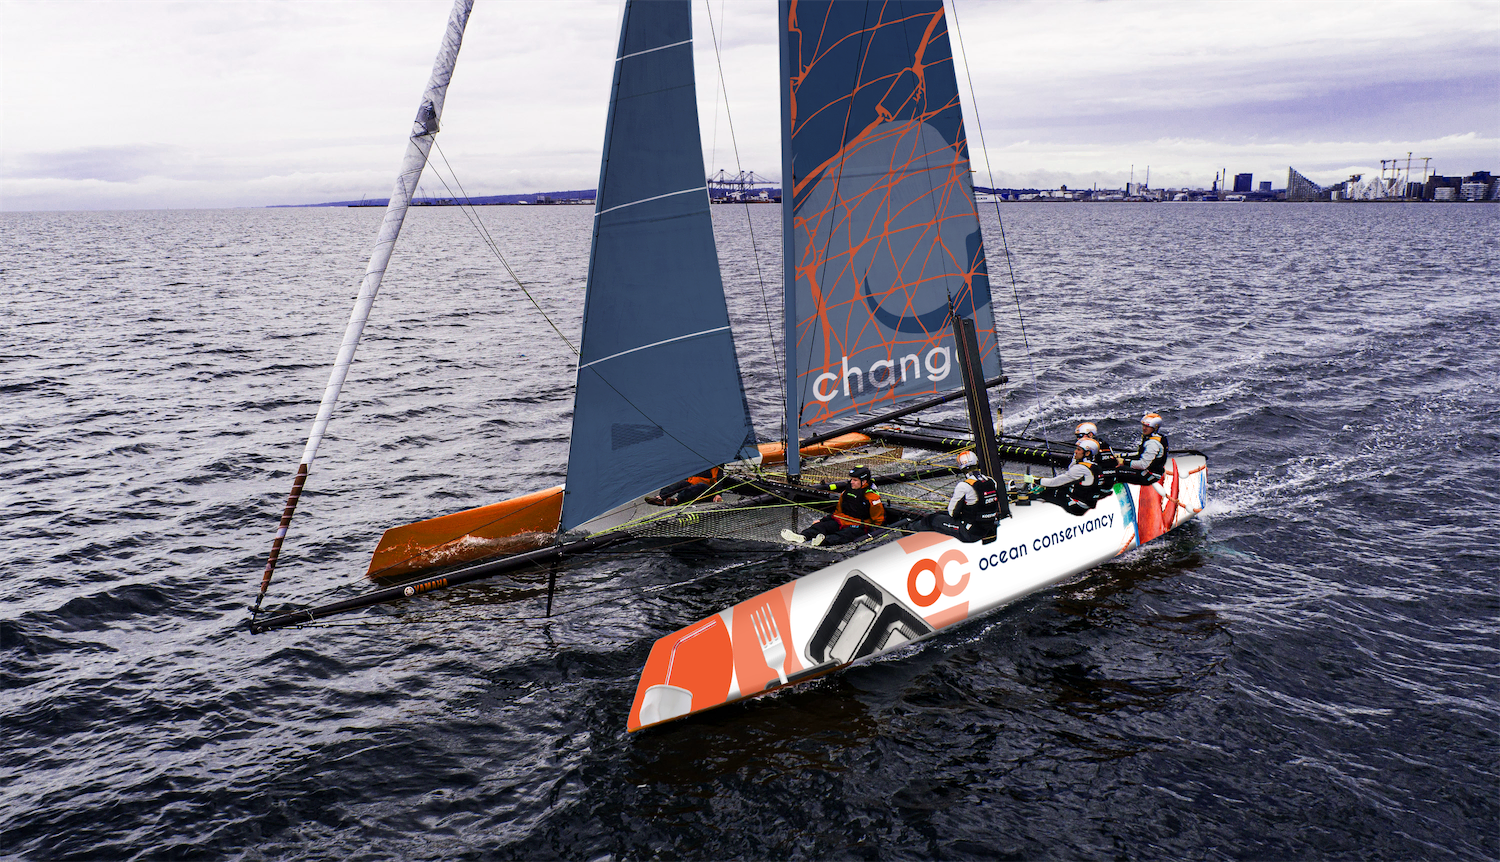 A GC32 racing sailboat mocked up to be sponsored by Ocean Conservancy. The blue sails have discarded orange fishing lines on them and the pontoons have trash amidst the logos to create the allusion that the boat is sailing through trash-filled harbors.